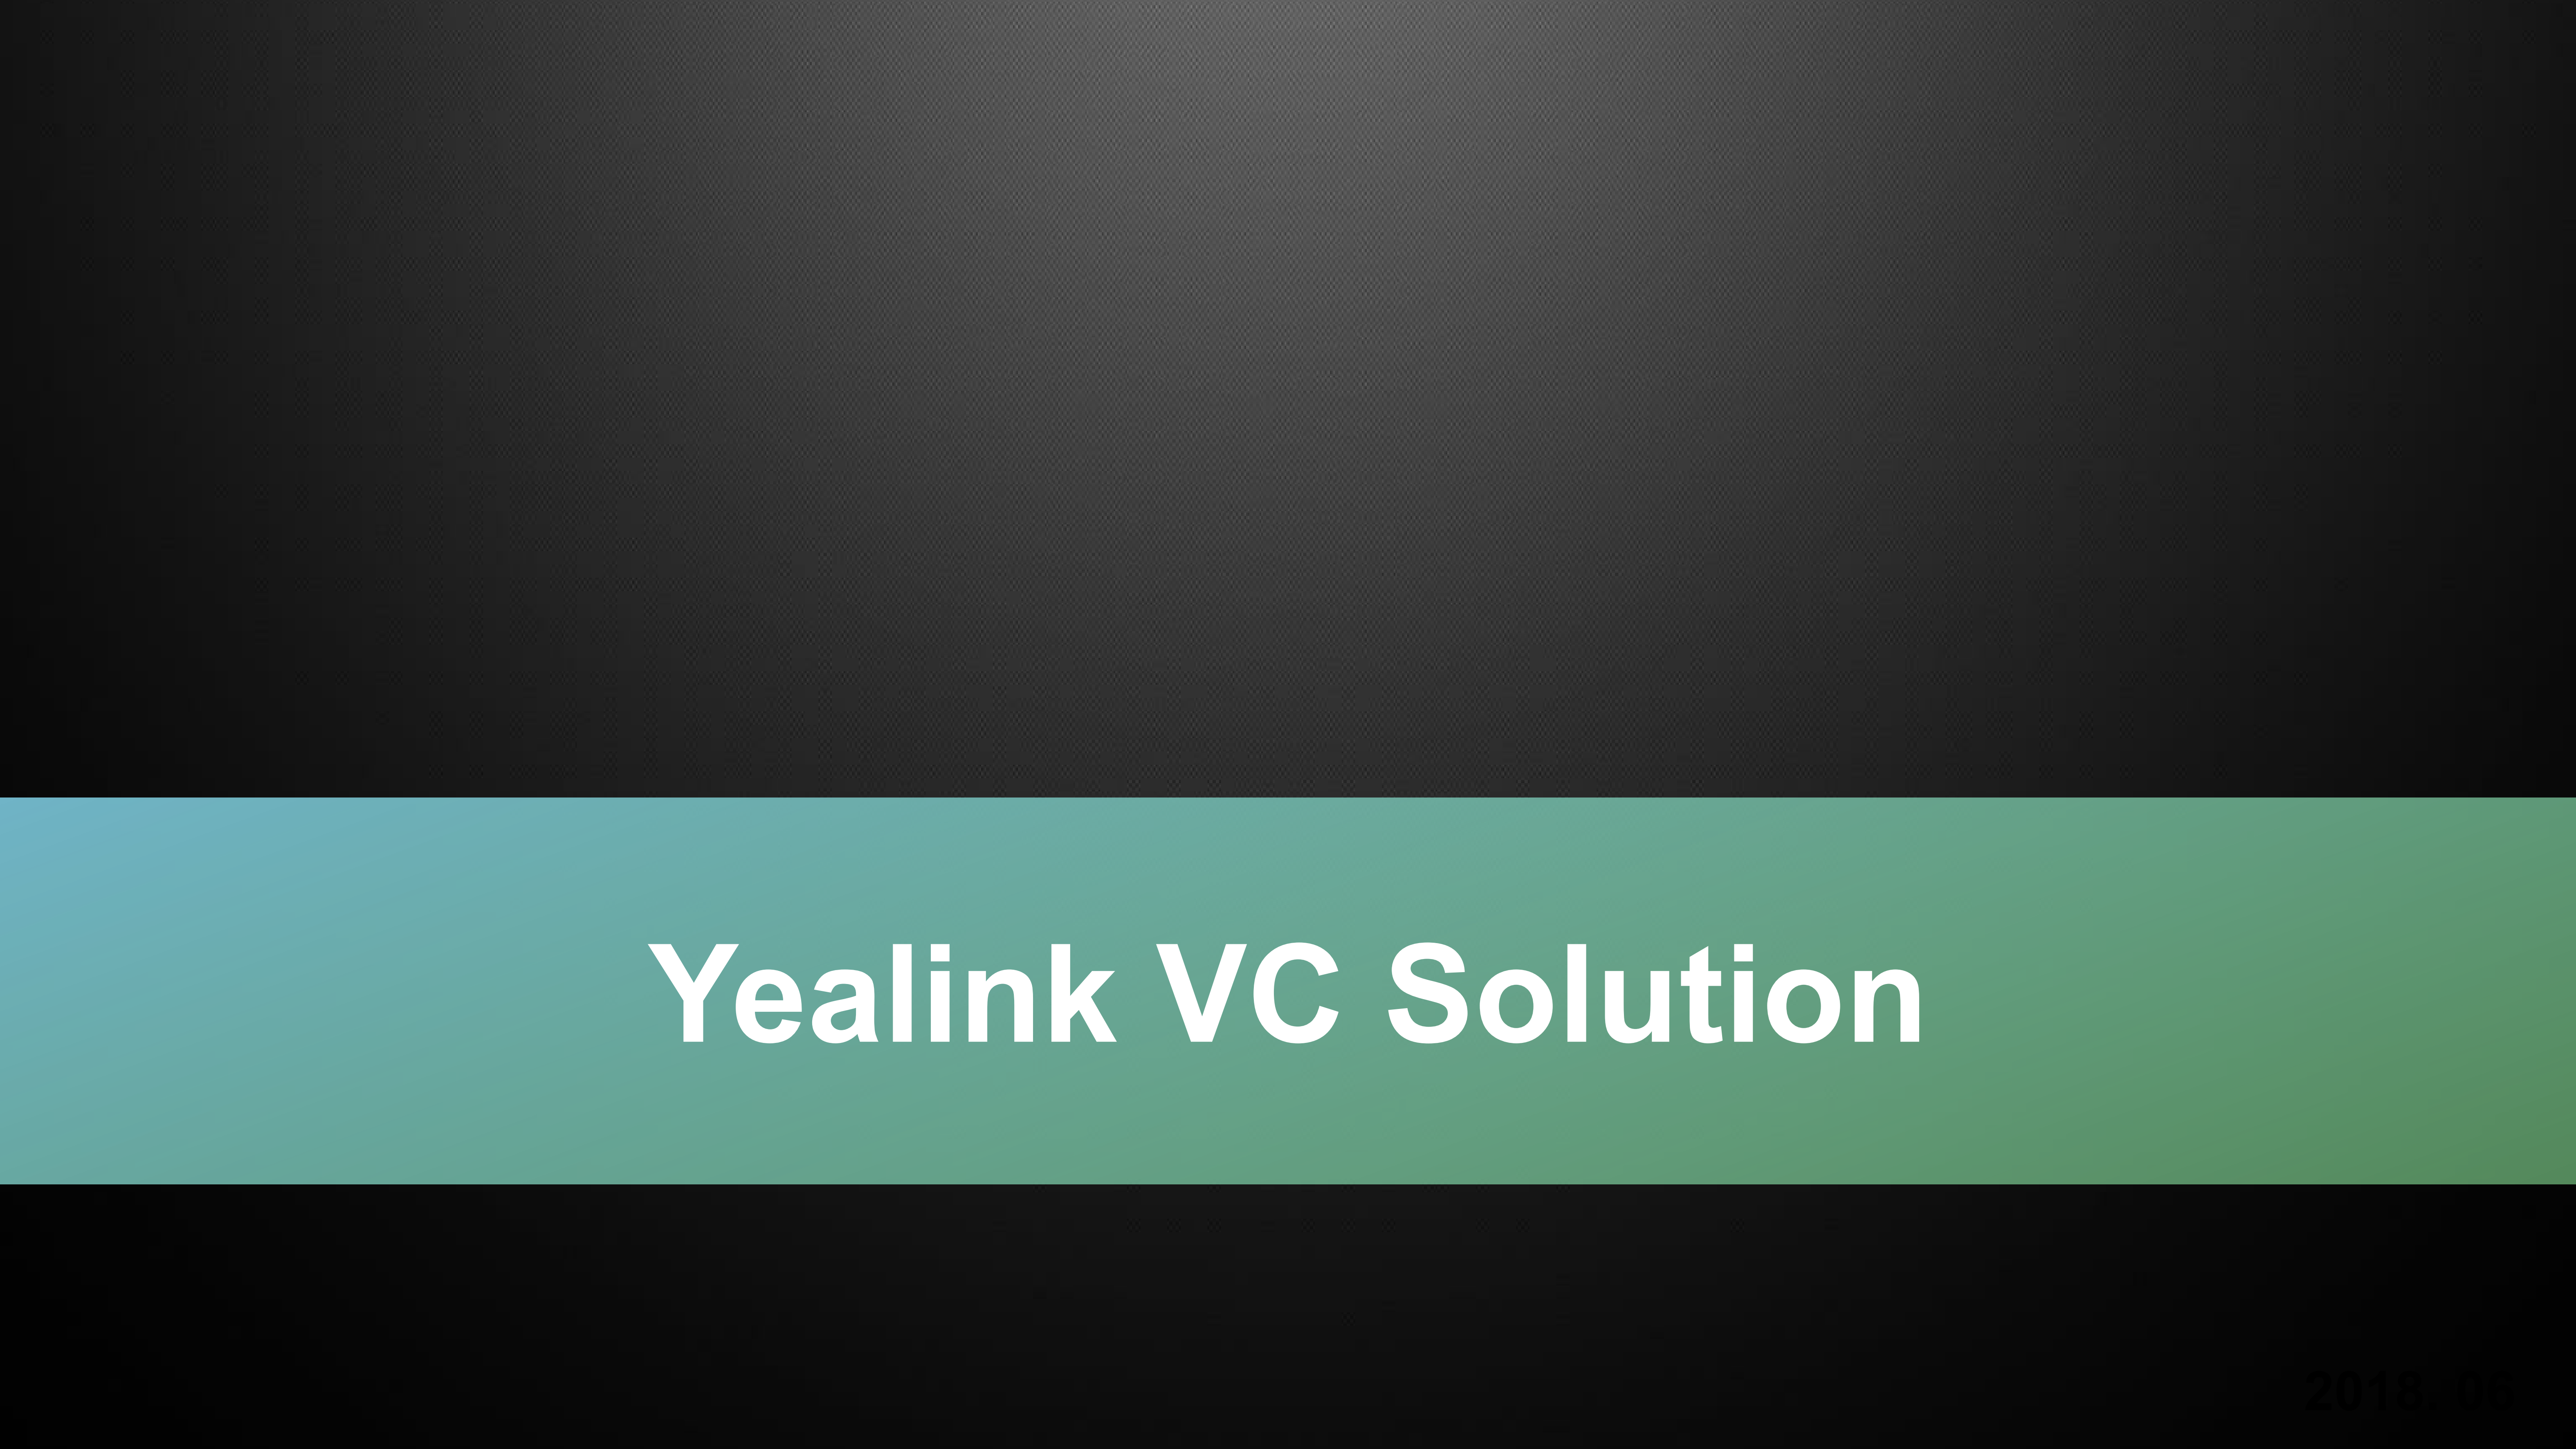 Yealink VC Solution 2019